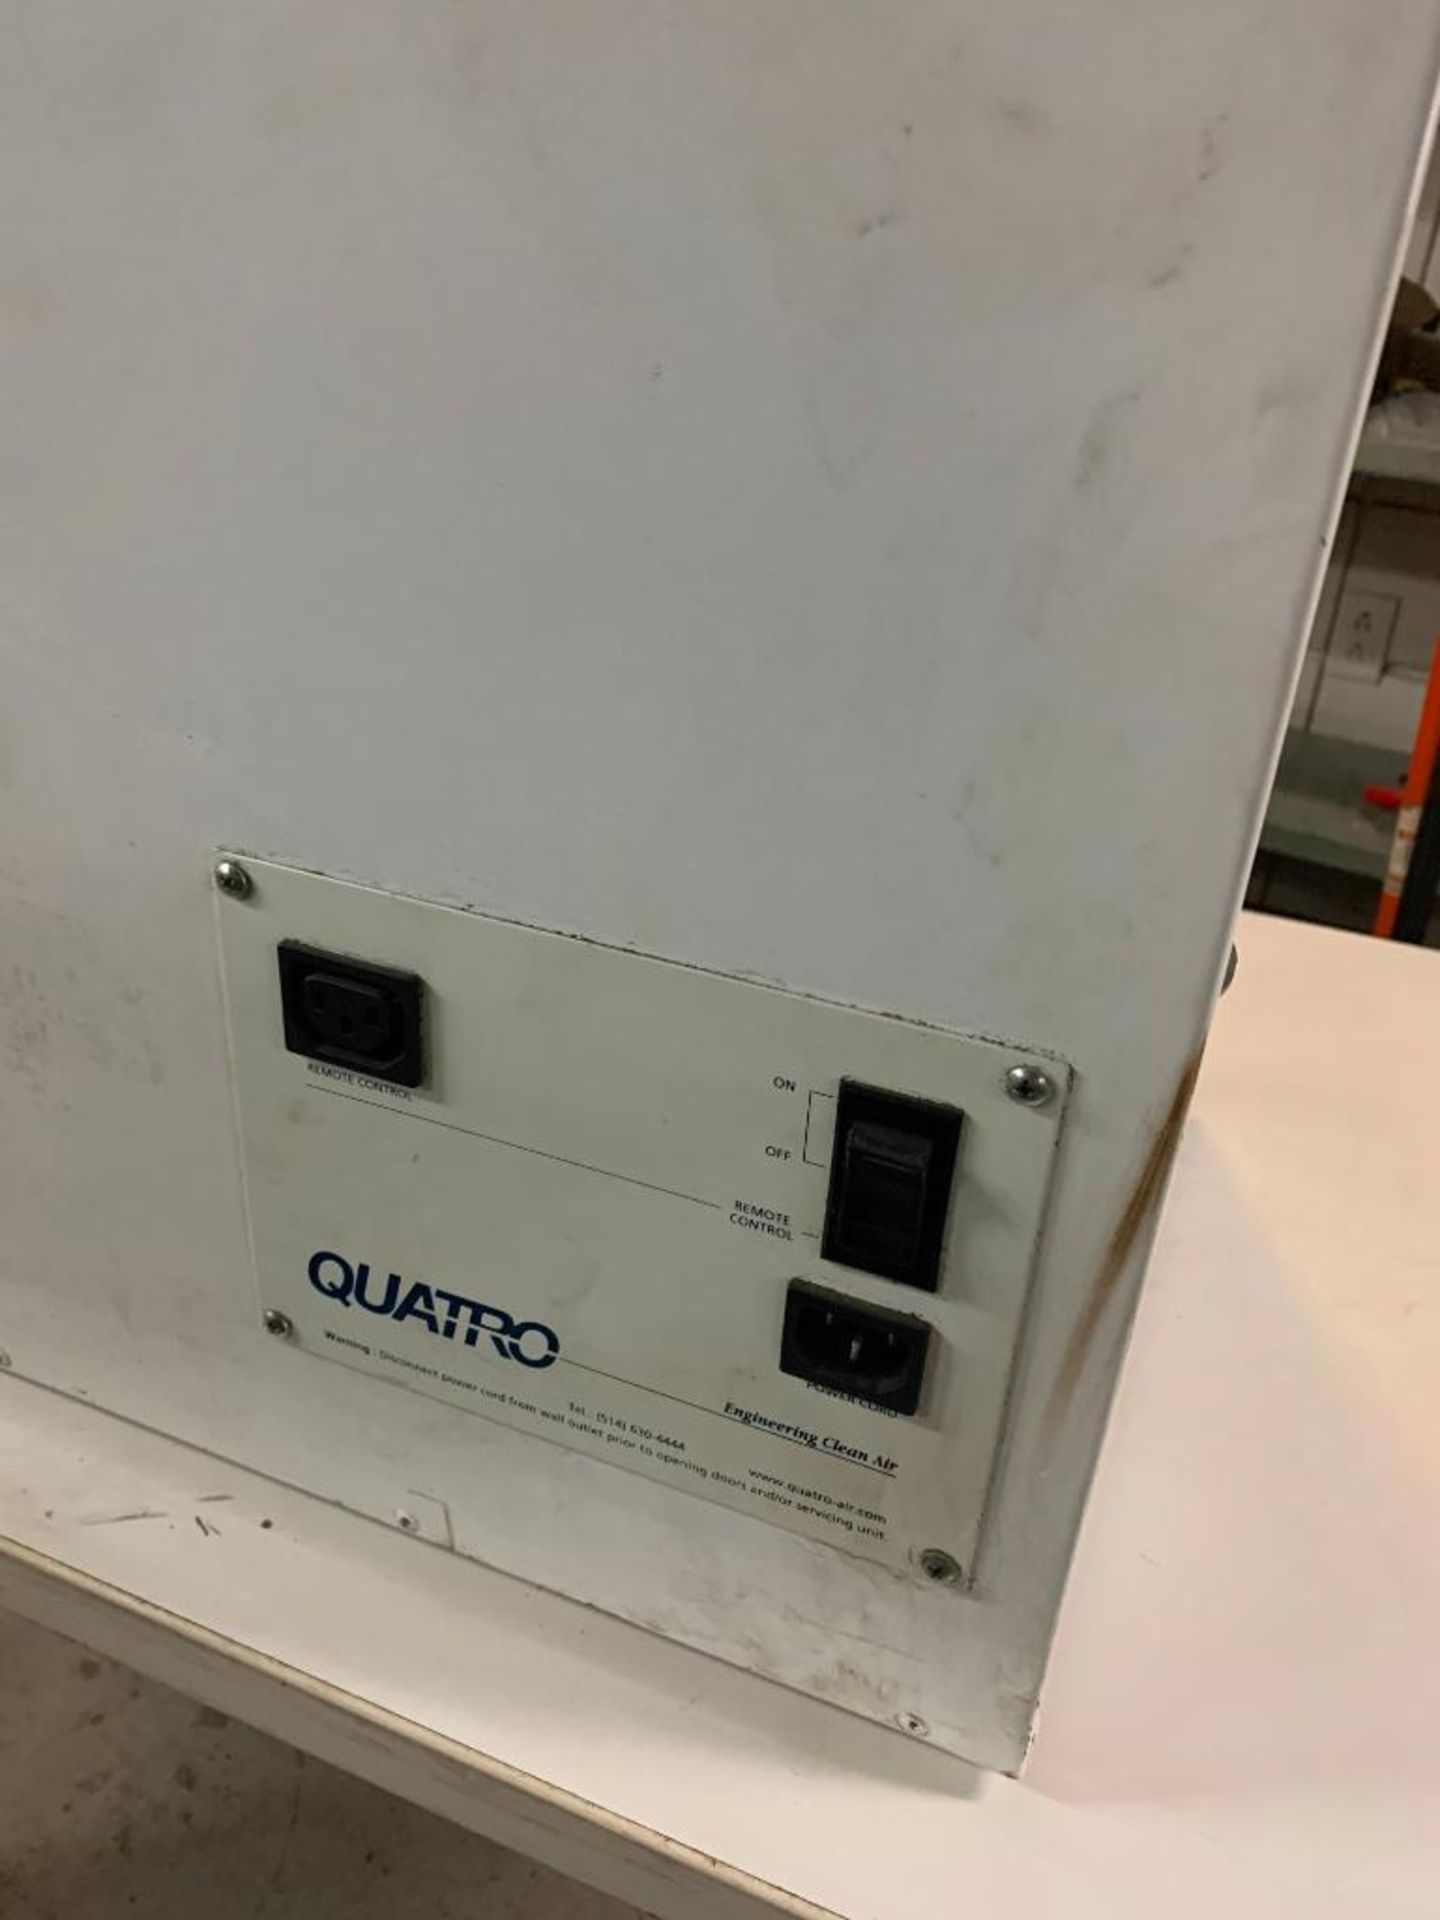 Quattro Portable Dust And Fume Collector Unit - Image 3 of 3